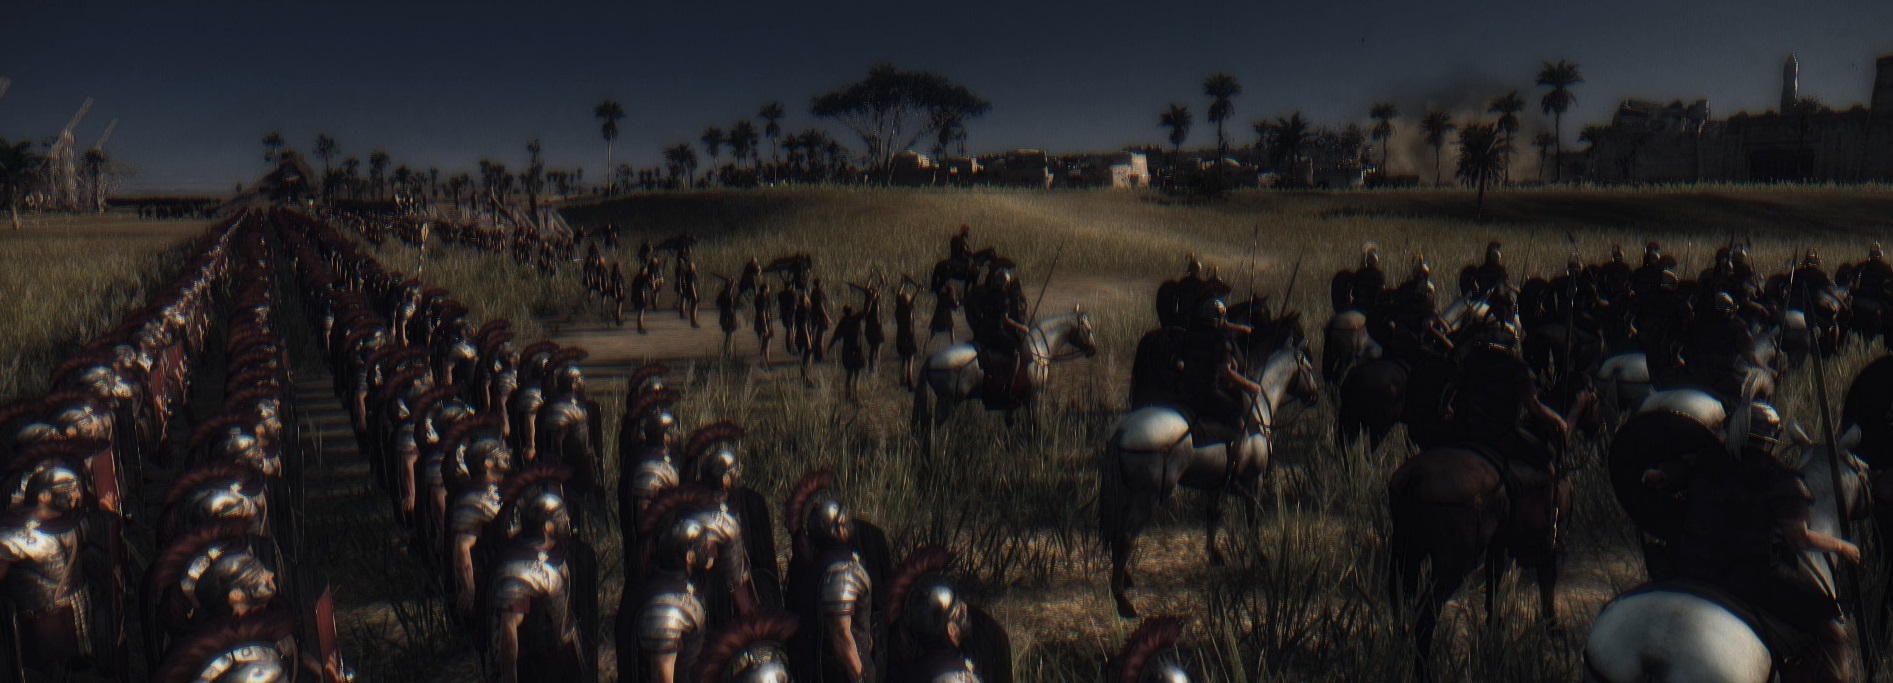 total war rome 2 emperor edition mod manager